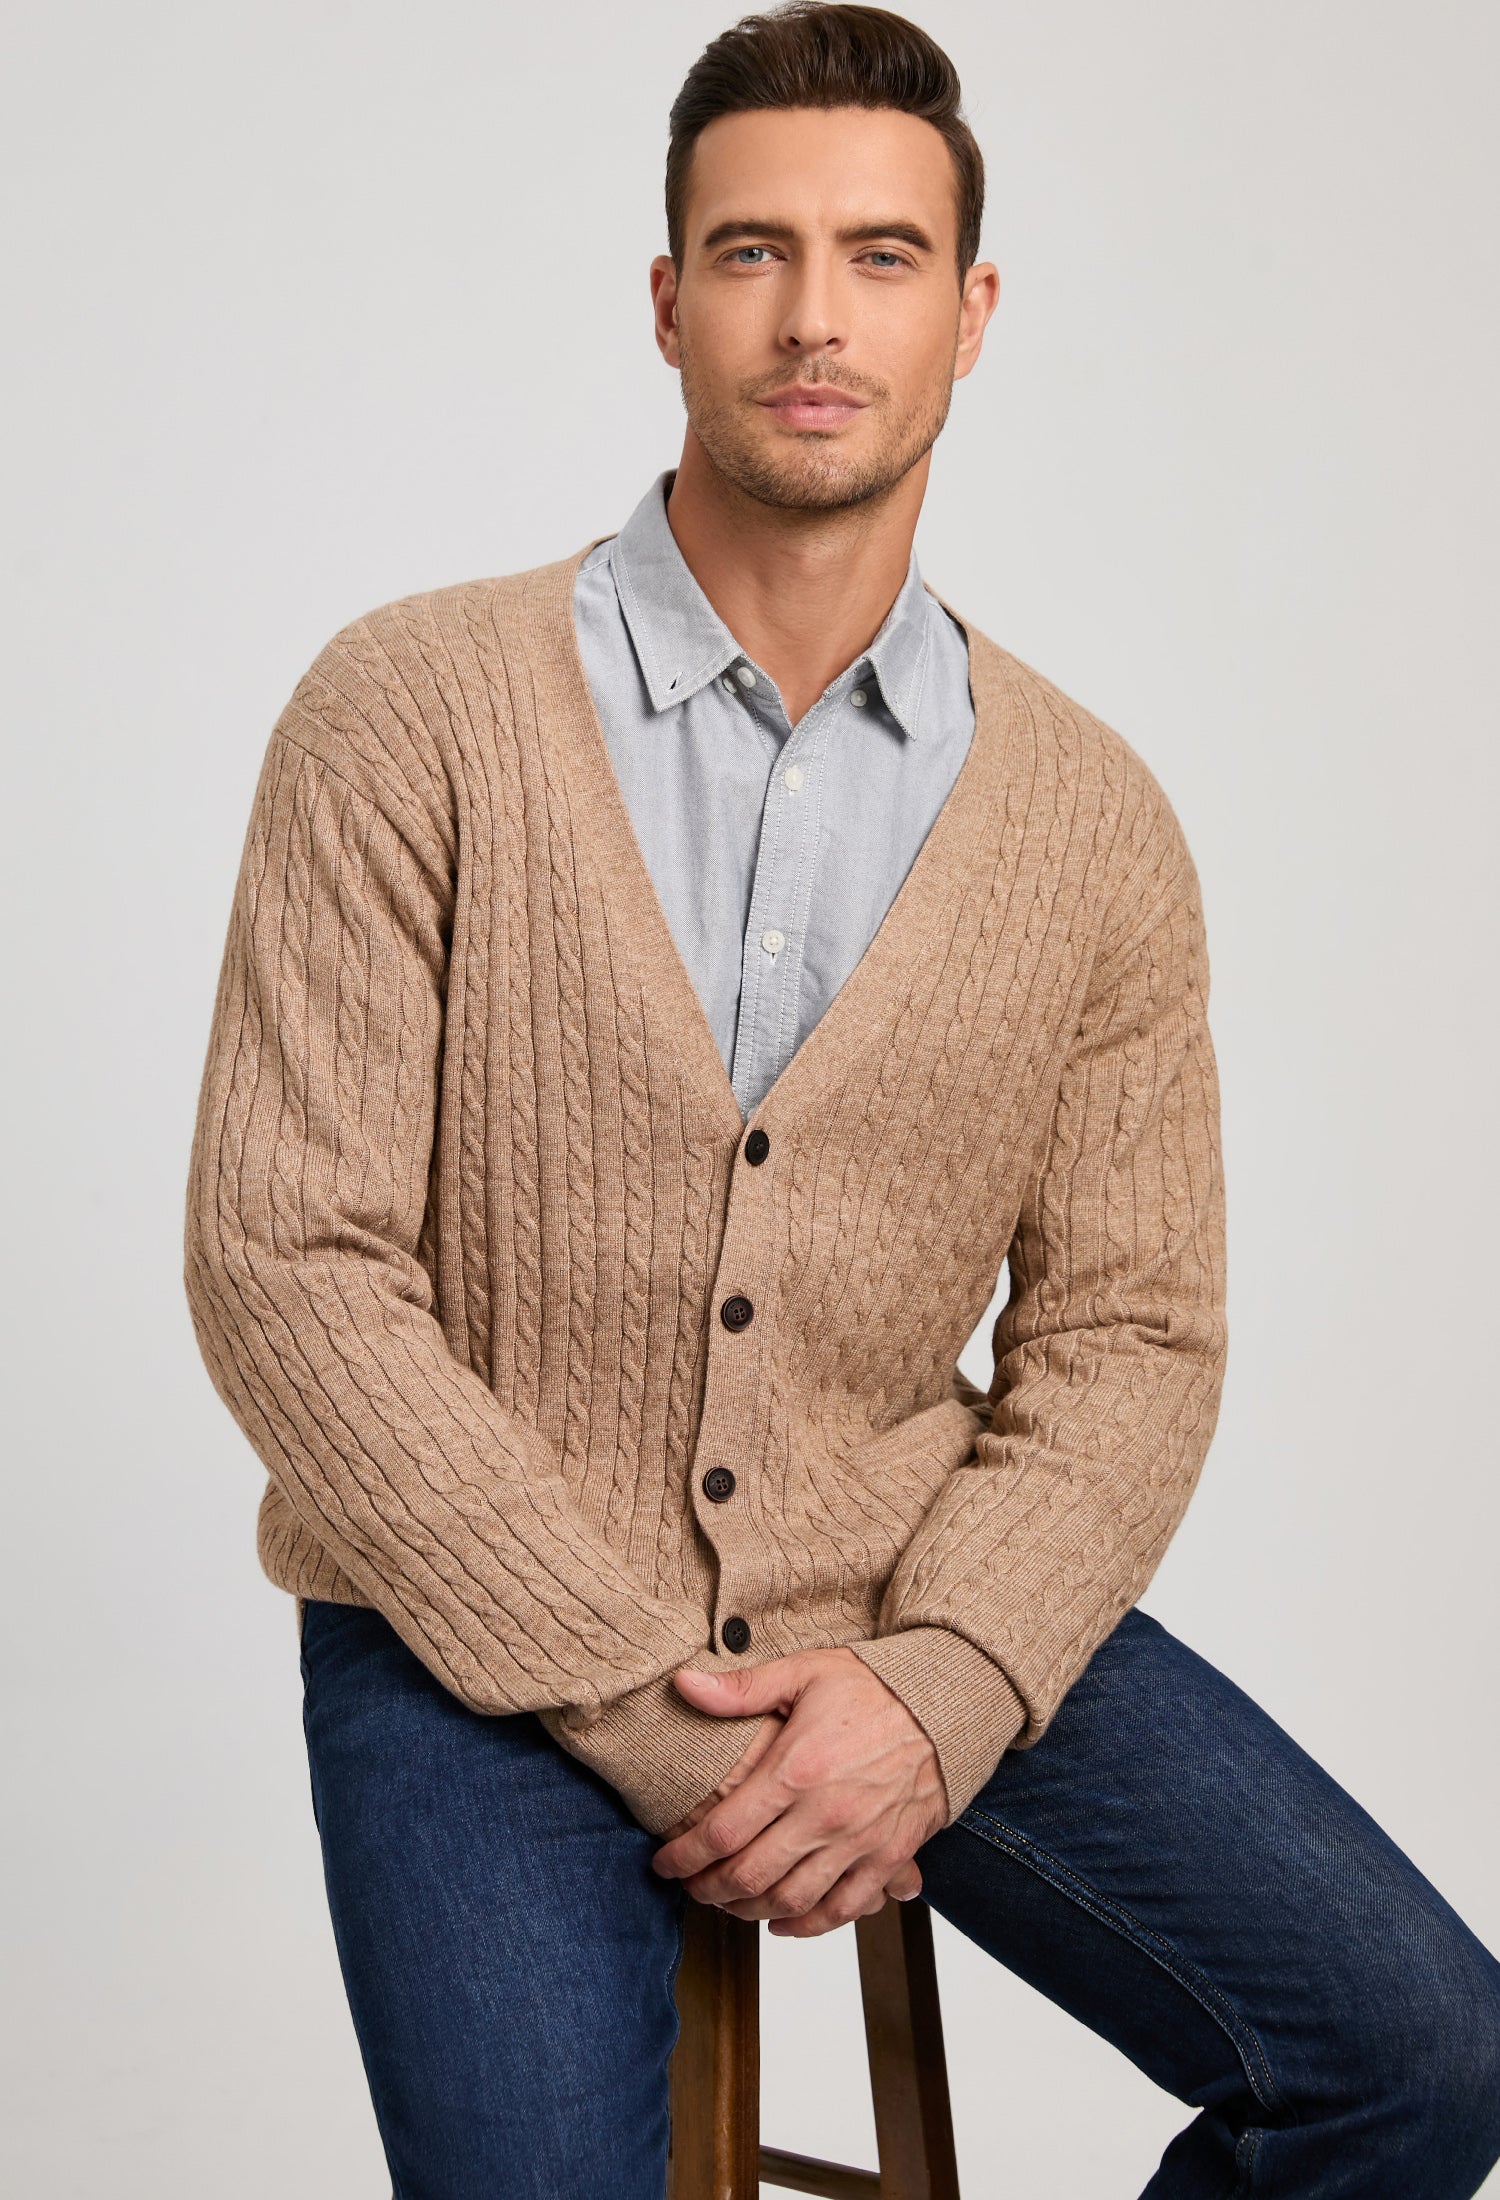 Kallspin Men's Cashmere Blend Cable-Knit Cardigan Sweaters - kallspinstore